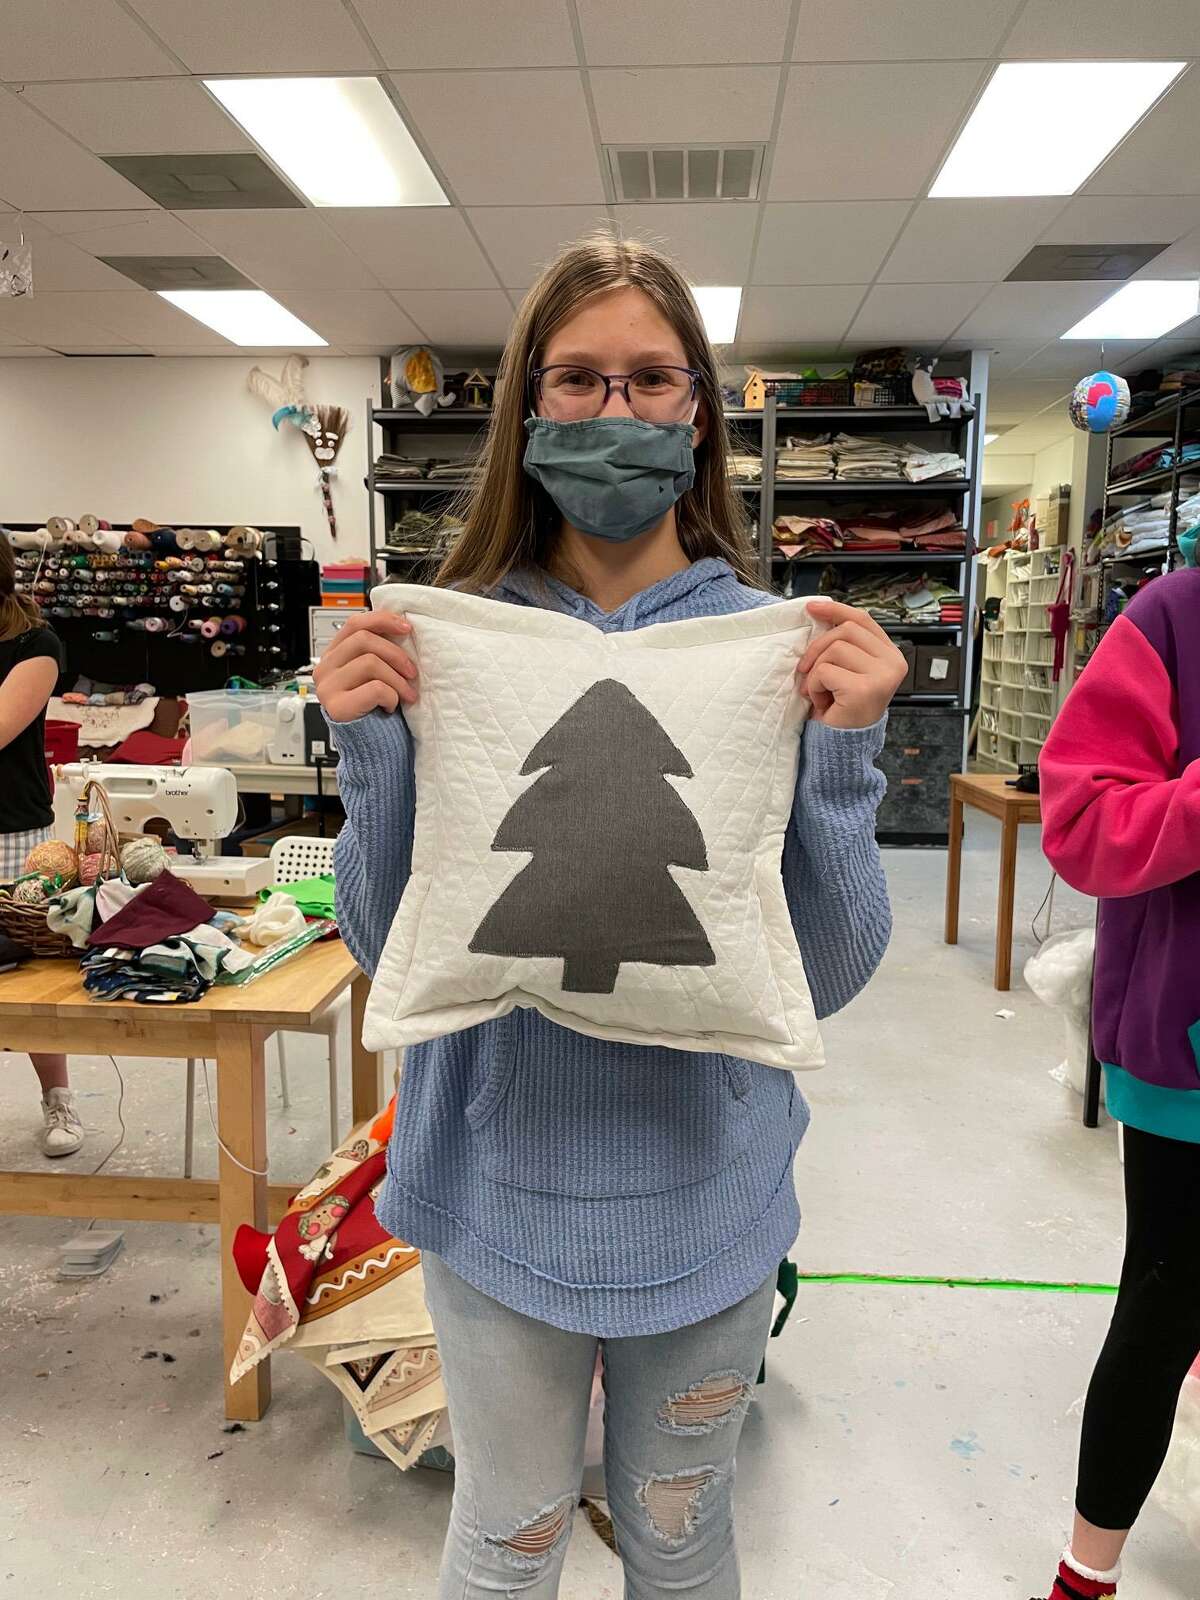 The Creativity Shell in Kingwood seeks to give children skills in cooking, sewing, and many other home economics-type classes and at the same time, it builds their confidence.